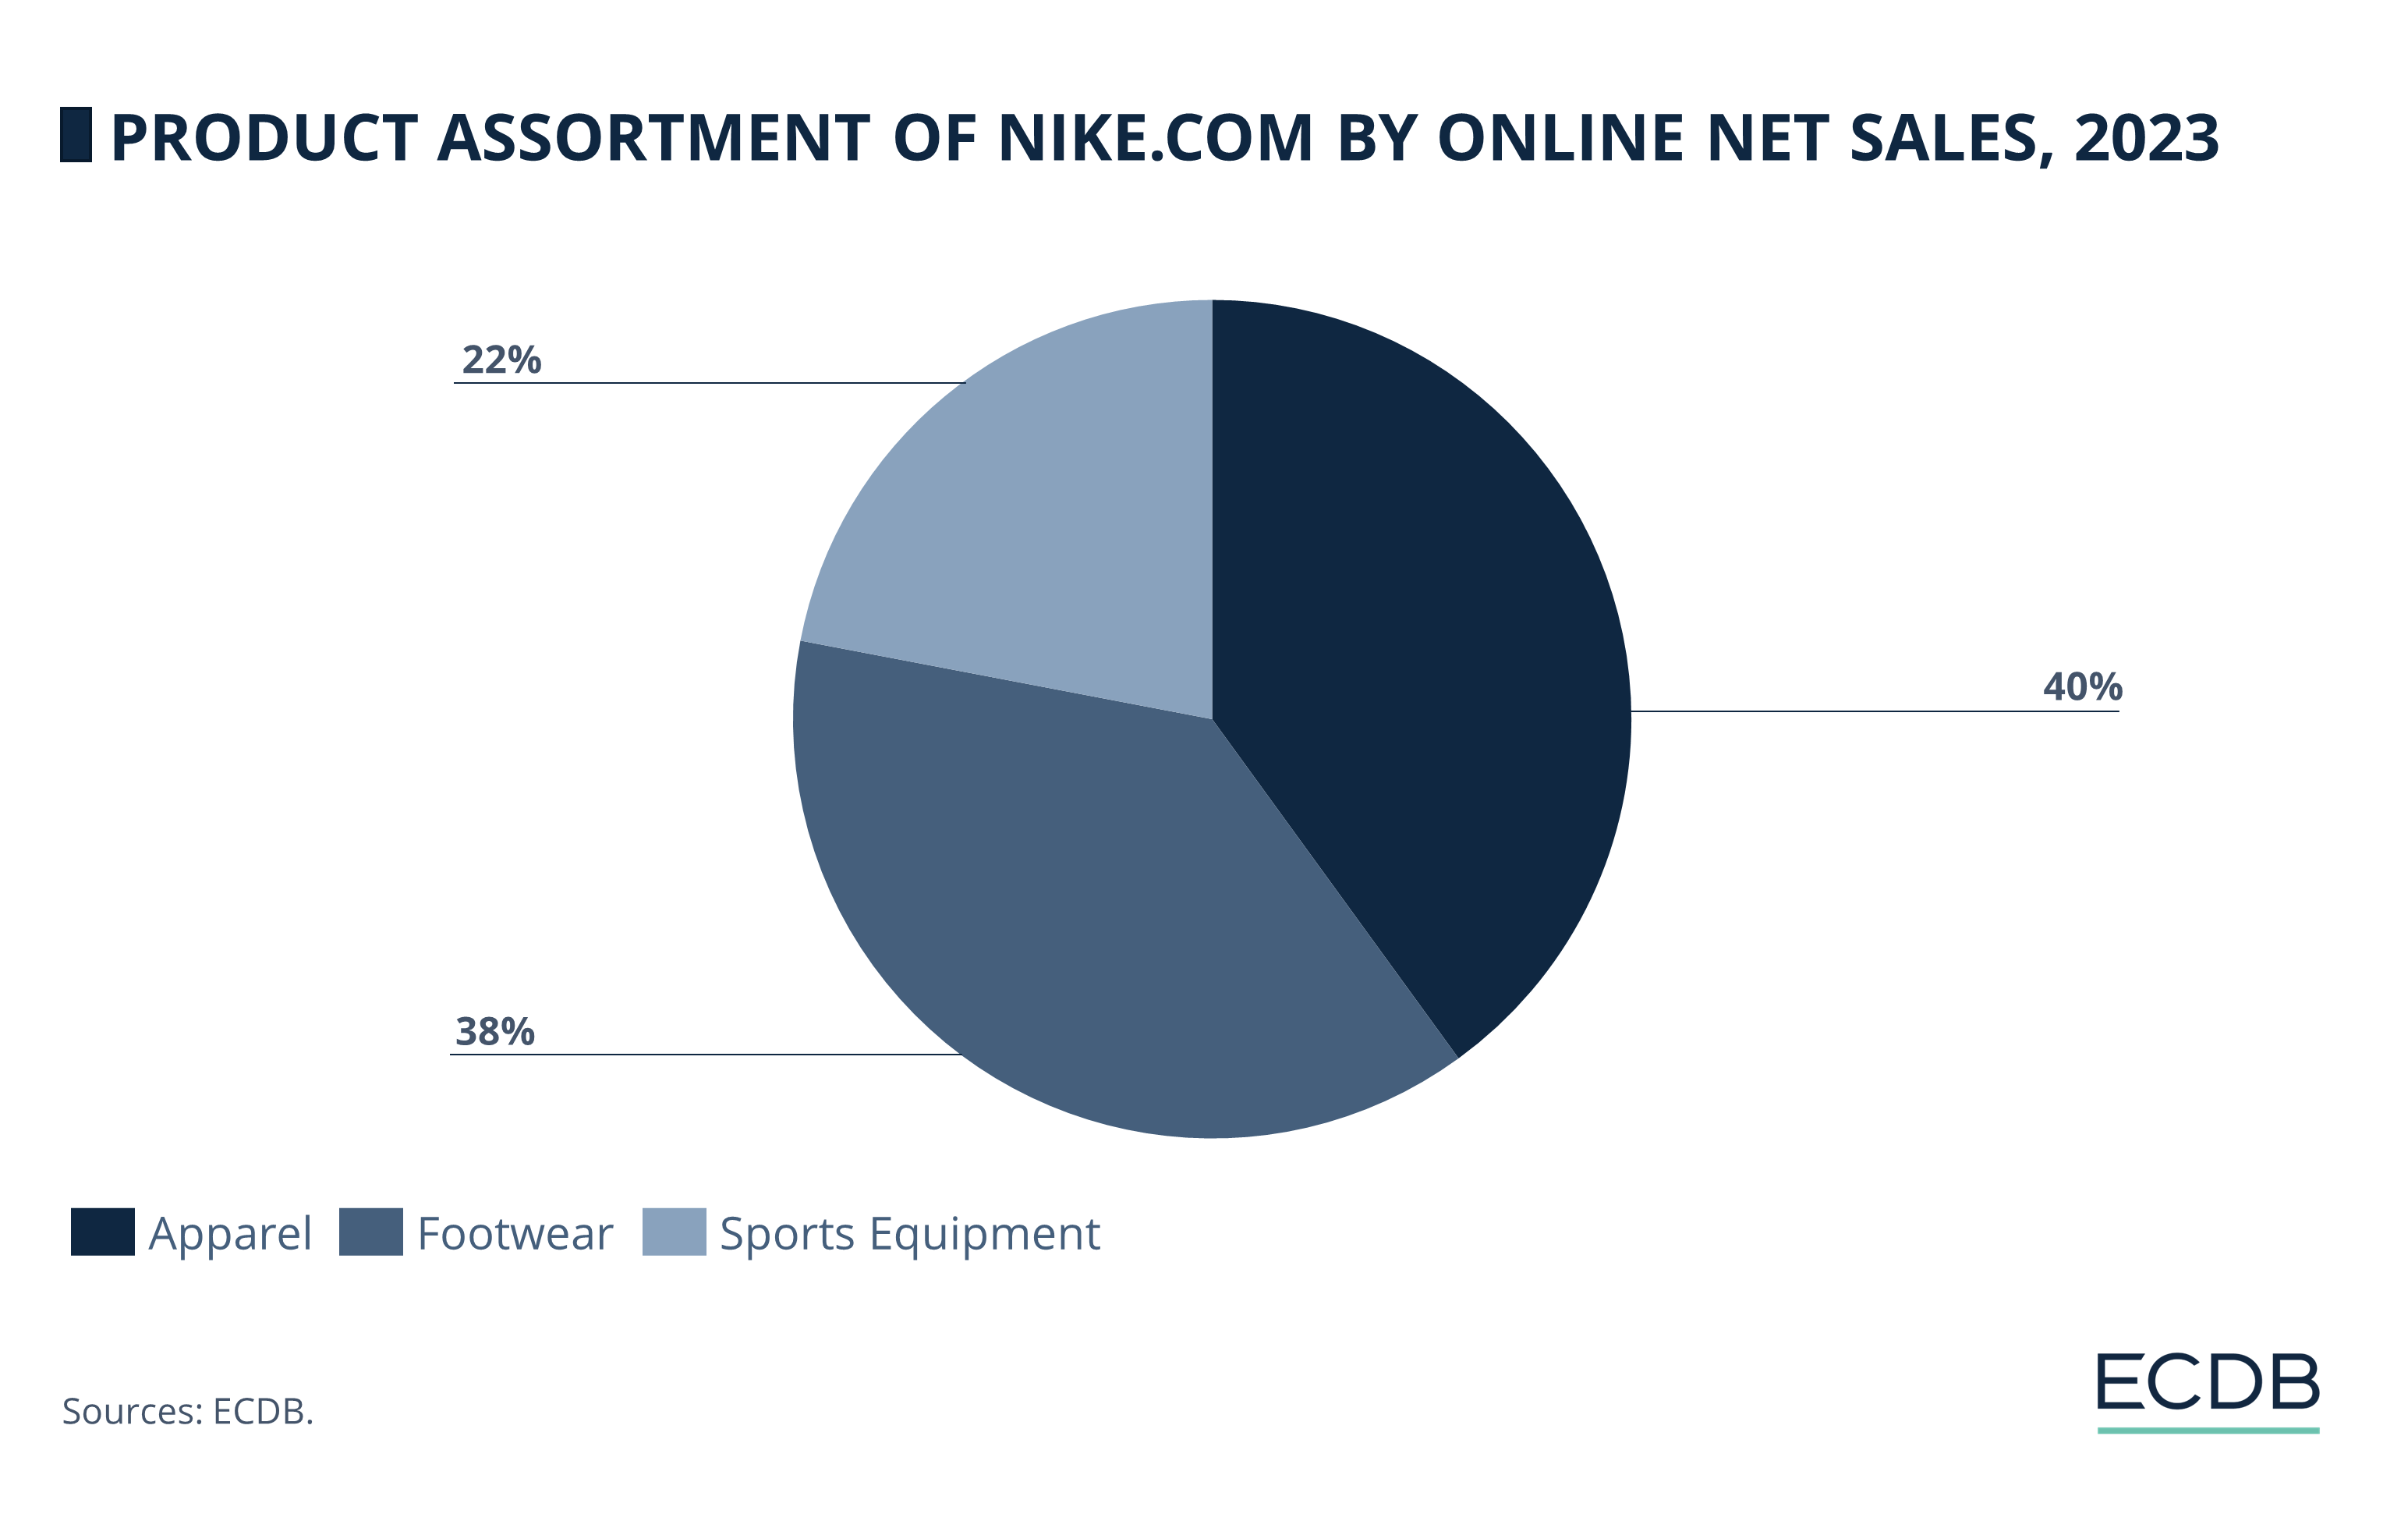 Product Assortment of Nike.com by Online Net Sales, 2023